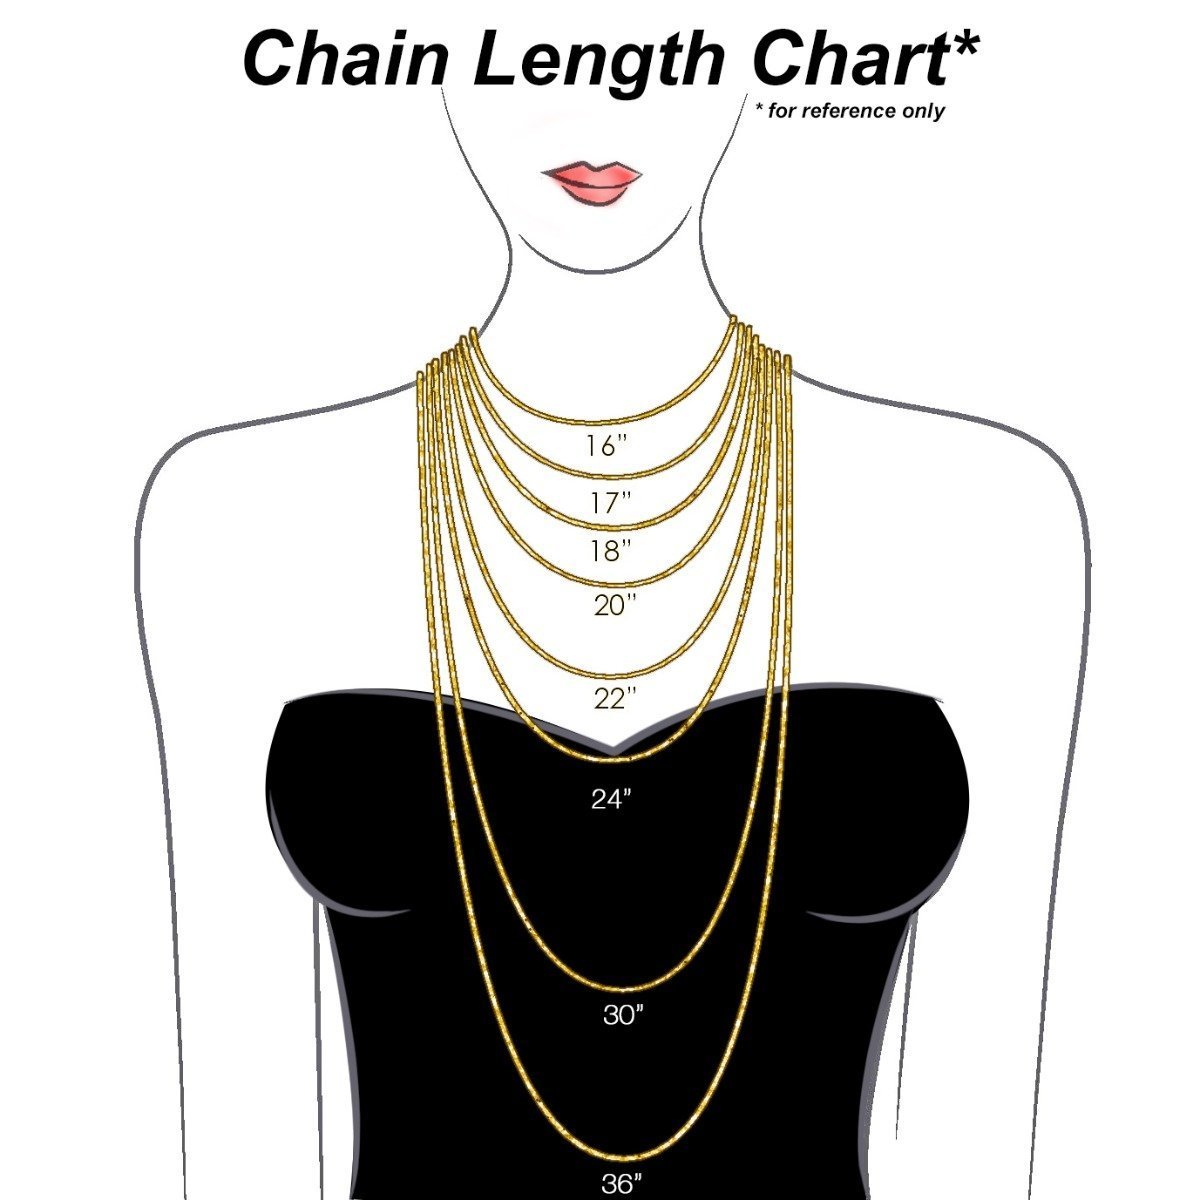 14KT GOLD 4.4MM SEMI SOLID FIGARO CHAIN NECKLACE - 4 LENGTHS 16 Inch / Yellow,16 Inch / White,18 Inch / Yellow,18 Inch / White,20 Inch / Yellow,20 Inch / White,24 Inch / Yellow,24 Inch / White